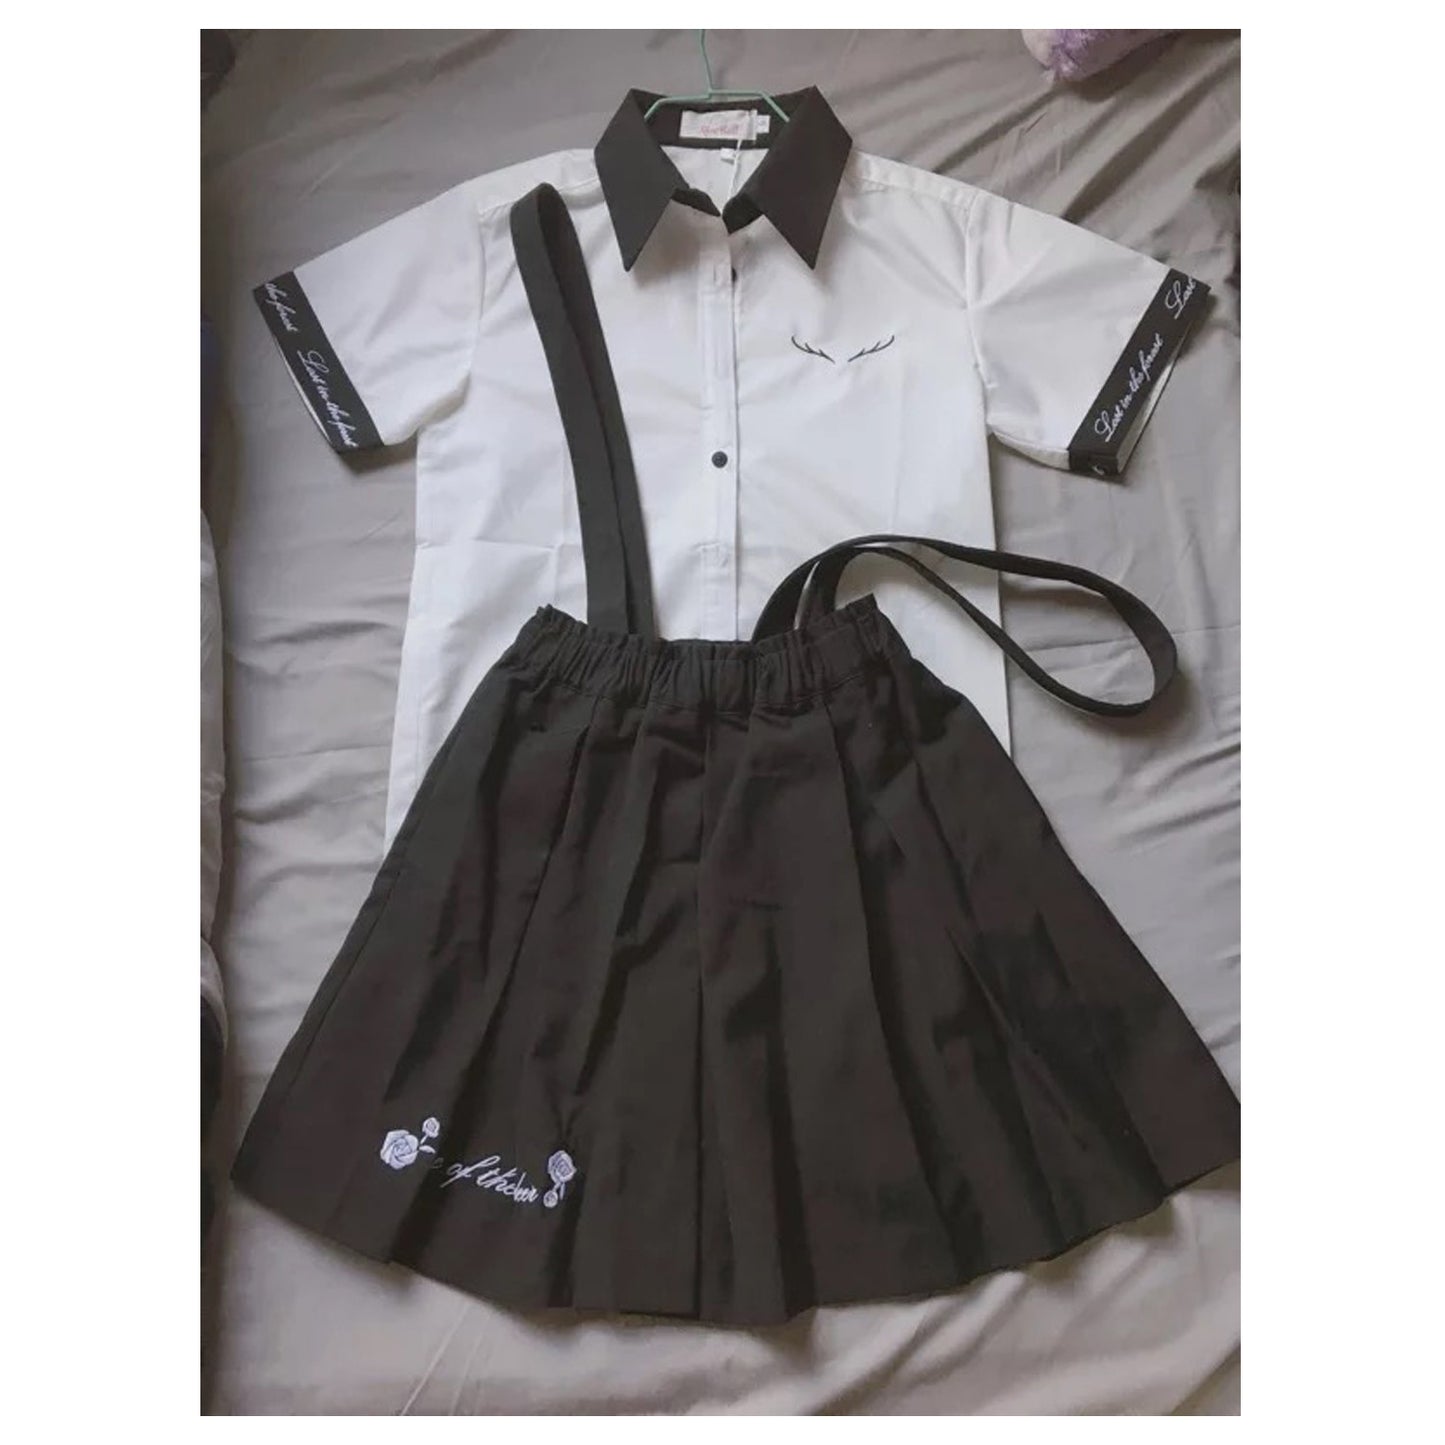 Embroidered Shirt + Short/Skirt Outfit SE10307